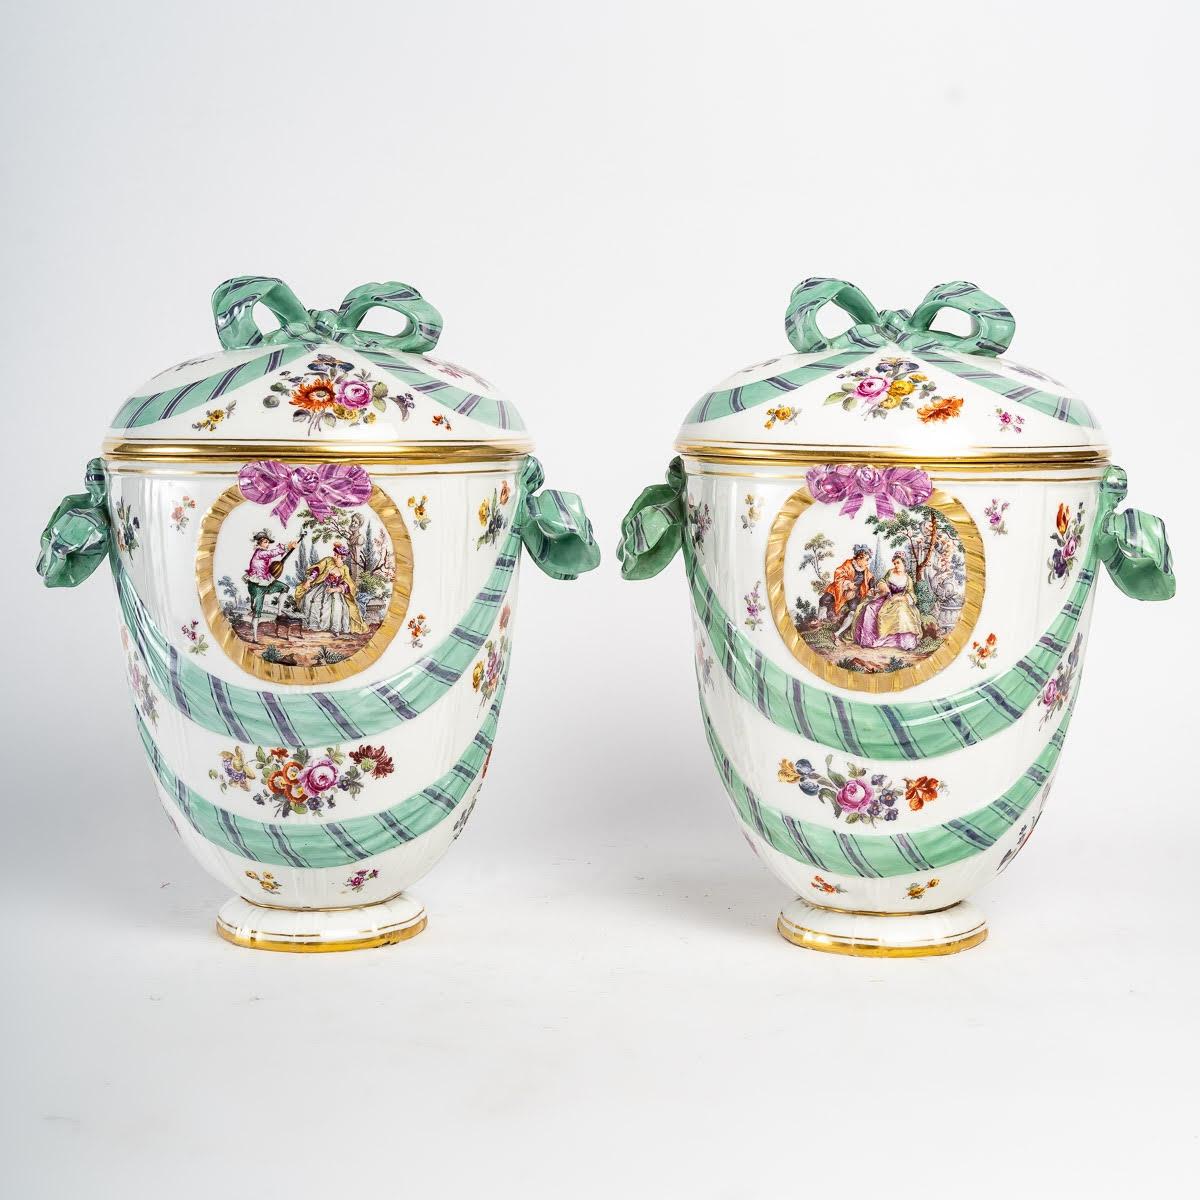 Pair of Large KPM Porcelain Covered Pots, 19th Century. For Sale 4